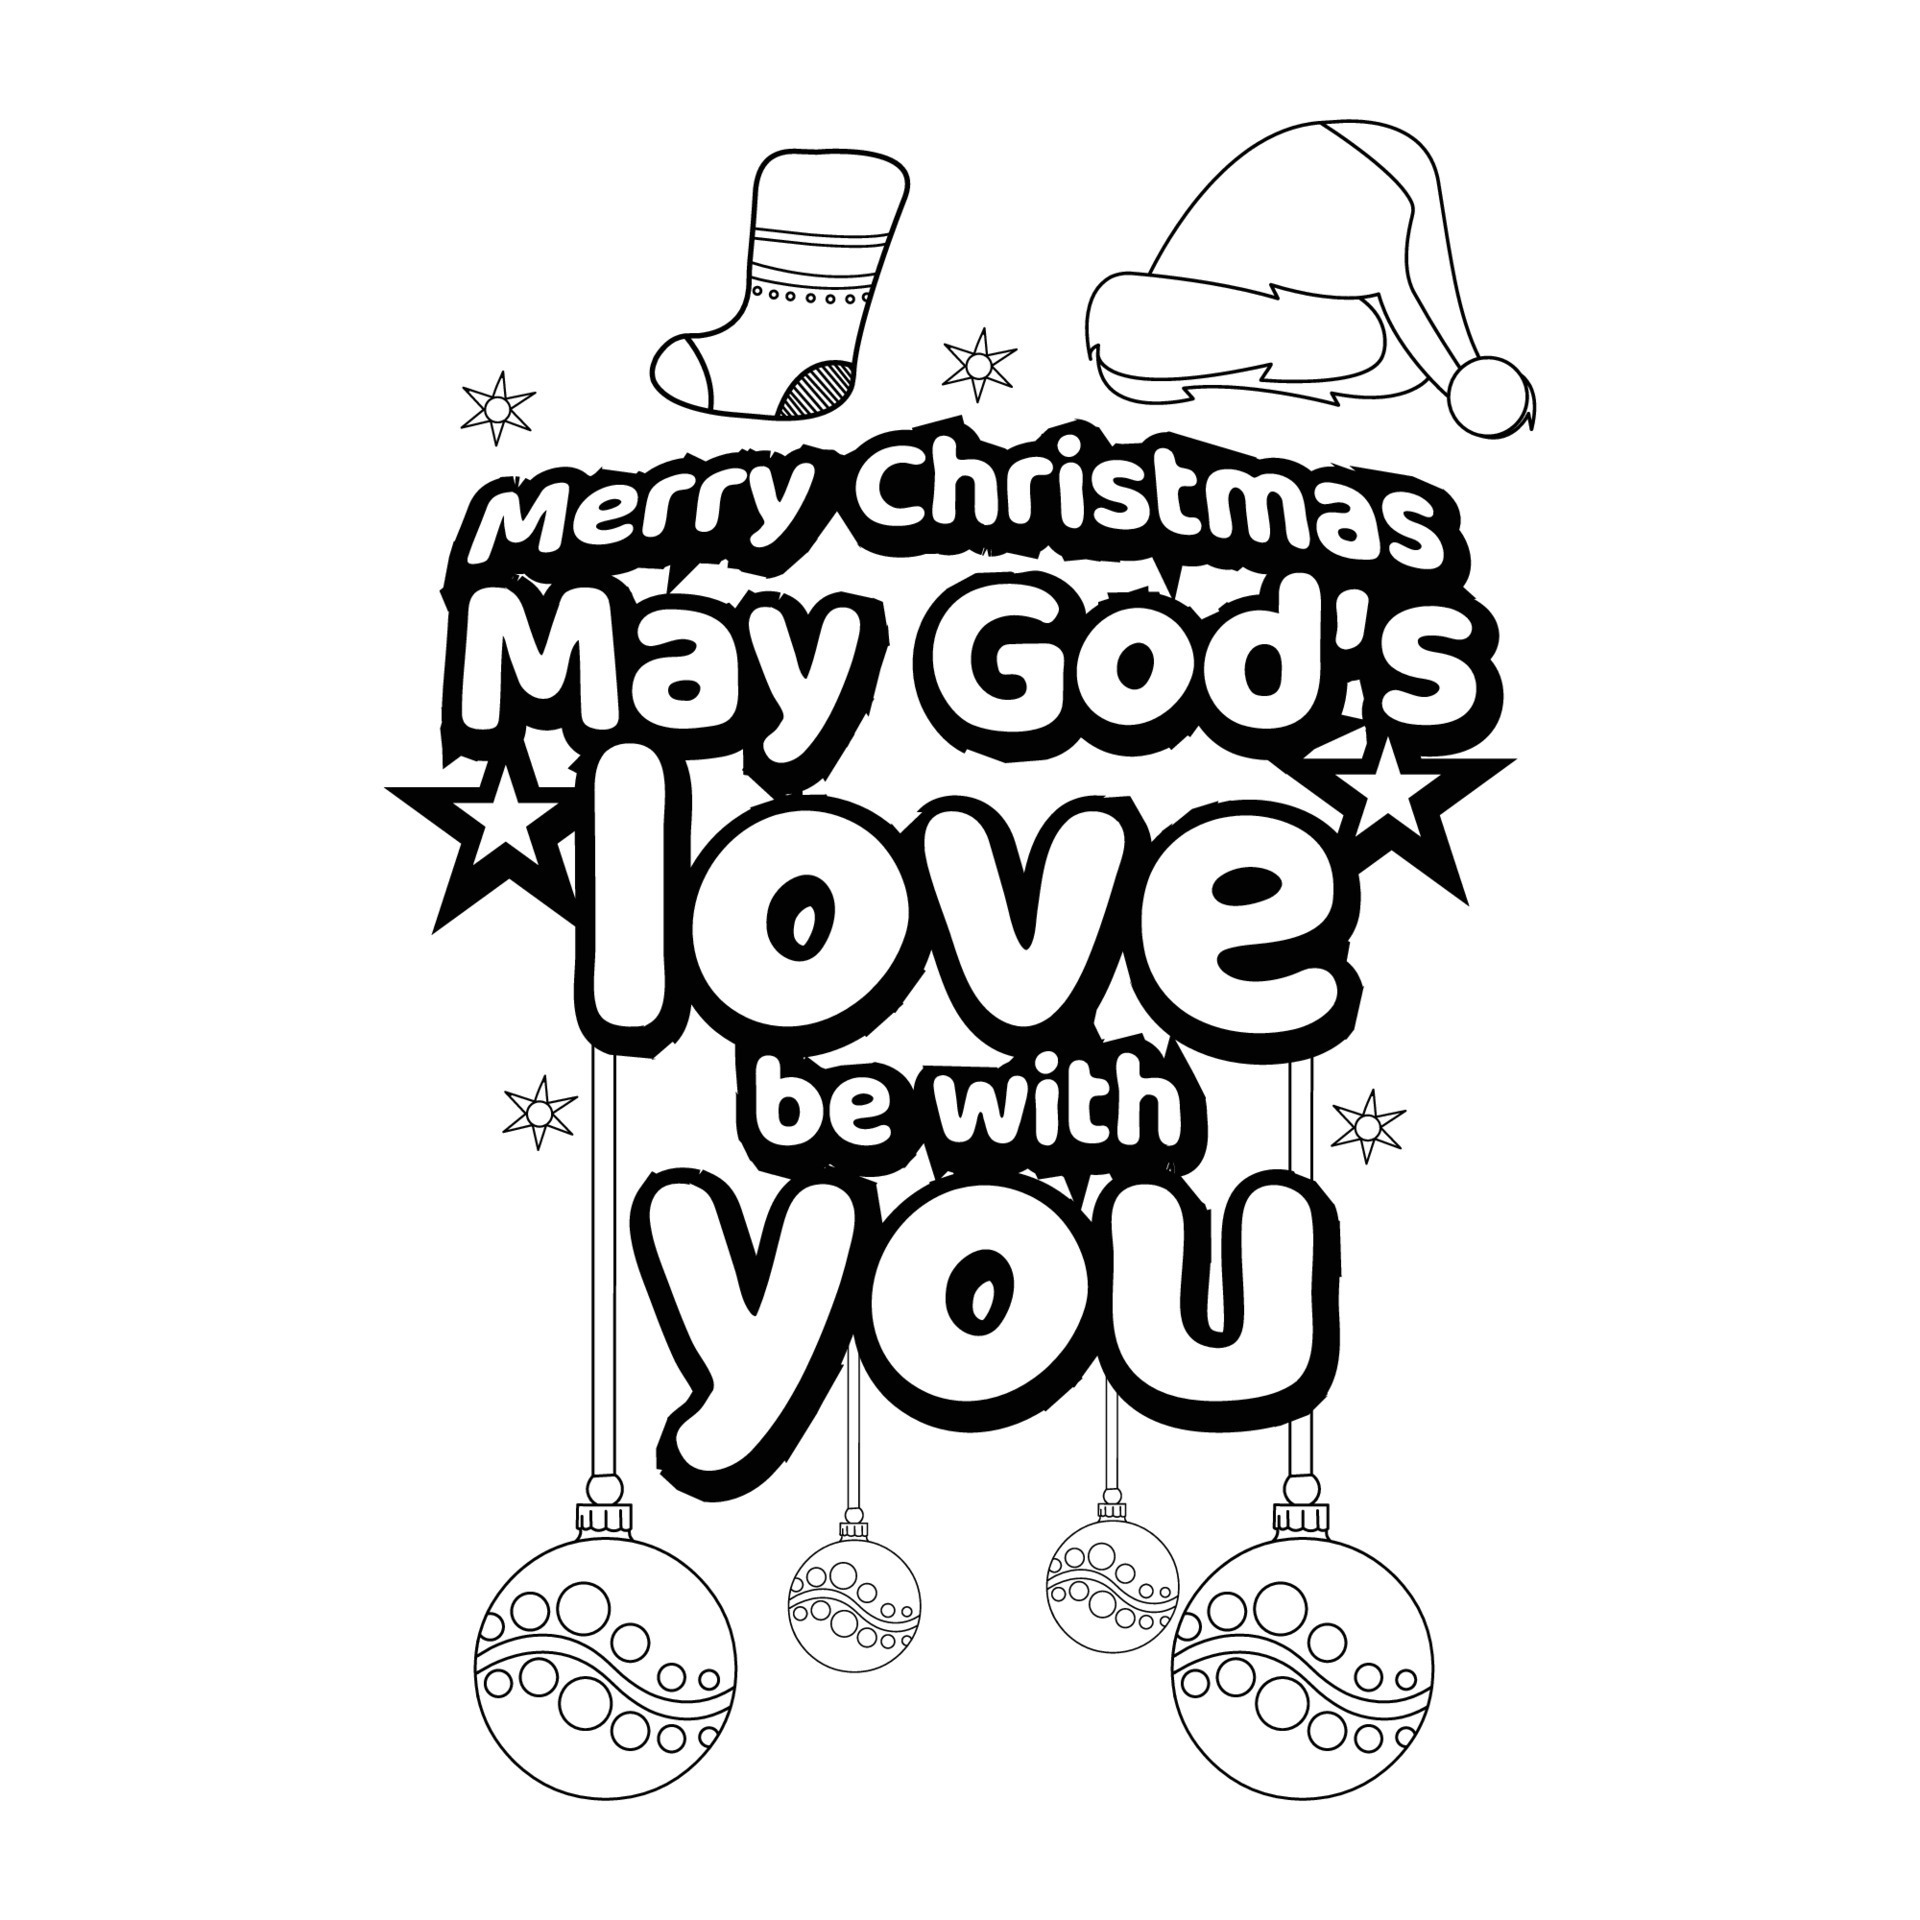 Merry Christmas Coloring Page Christmas Line Art Coloring Page Design 